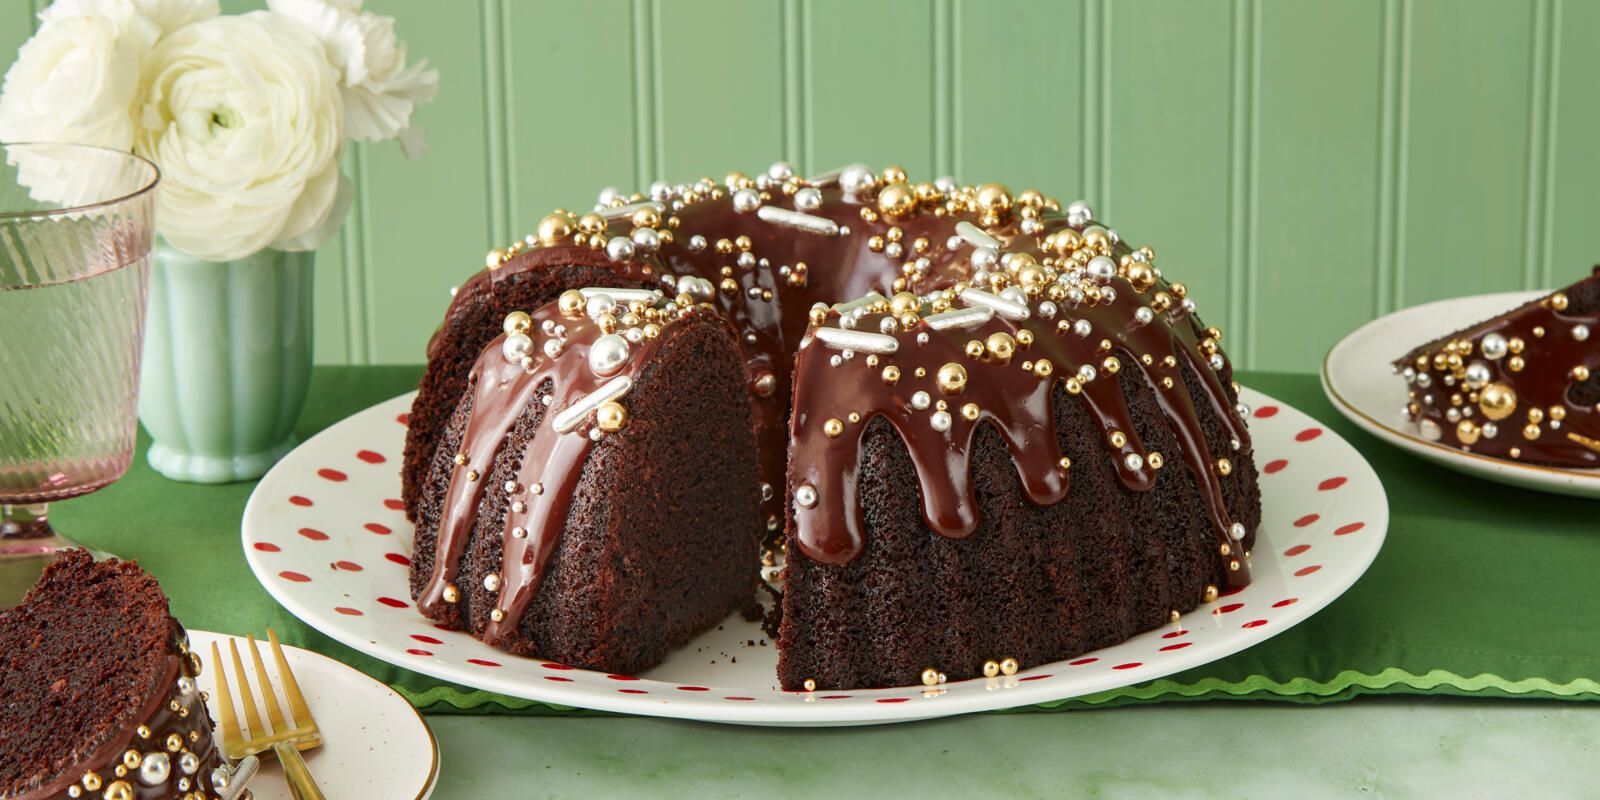 Make All the Bundt Cakes of Your Dreams with This Boxed Cake Mix